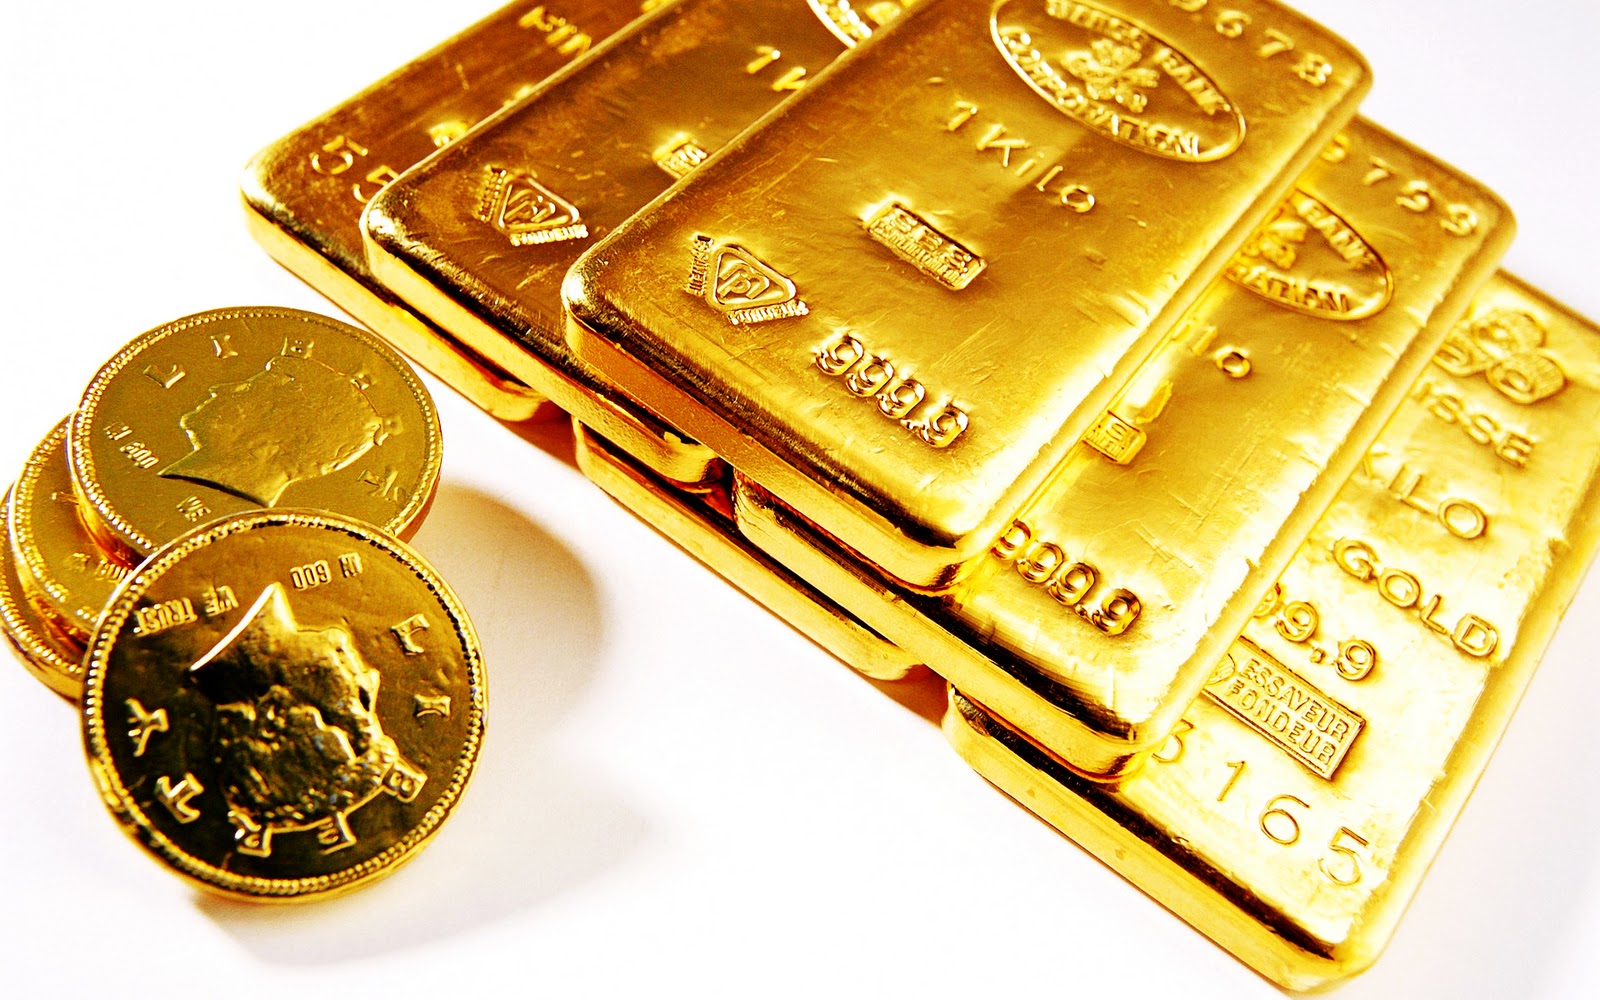 Gold Bars And Coins HD Wallpaper Stock Photos Image To